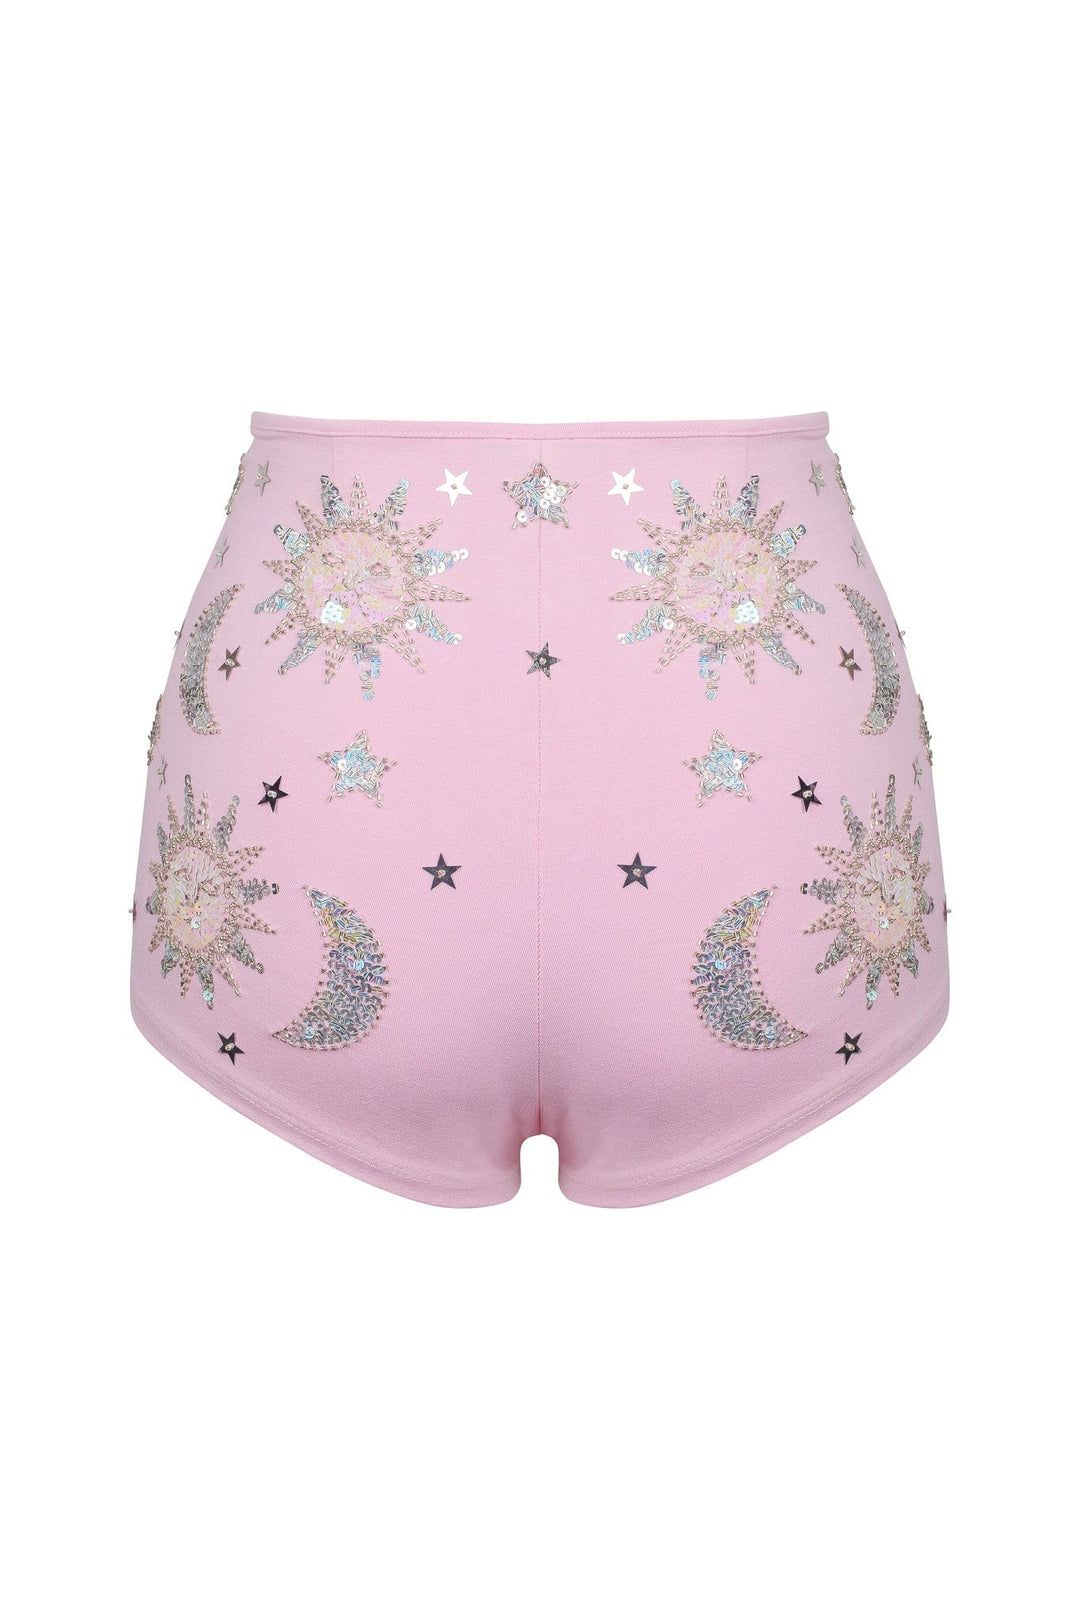 PRE-ORDER / STELLA SEQUIN SPARKLE HOT PANT SHORTS - PINK/SILVER - Her Pony